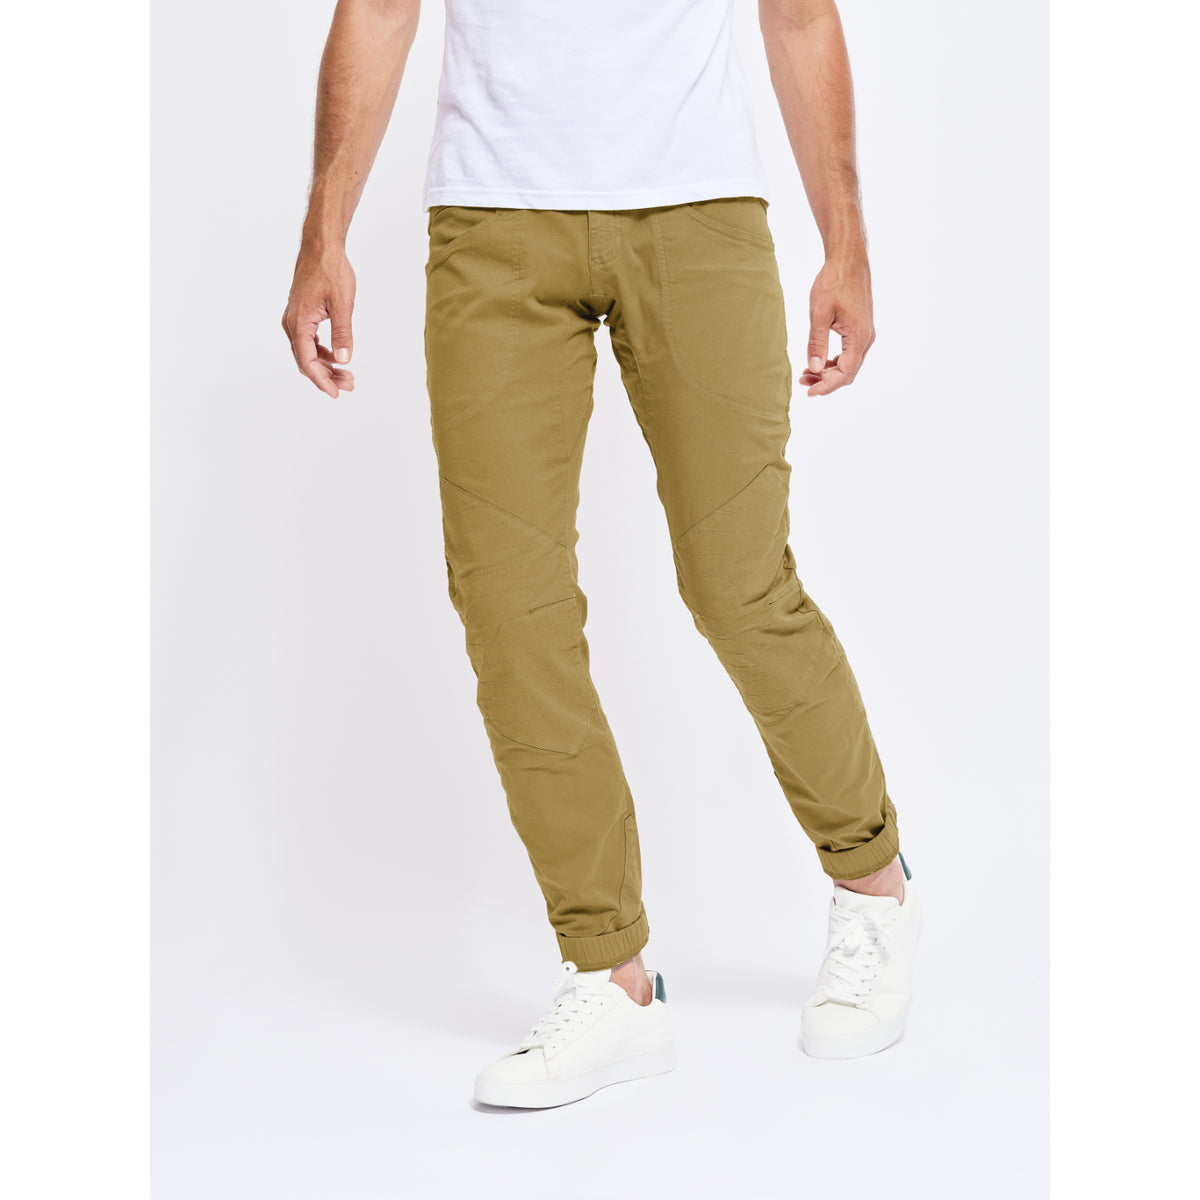 Looking For Wild Fitz Roy Pant - Mens (Prairie Sand)